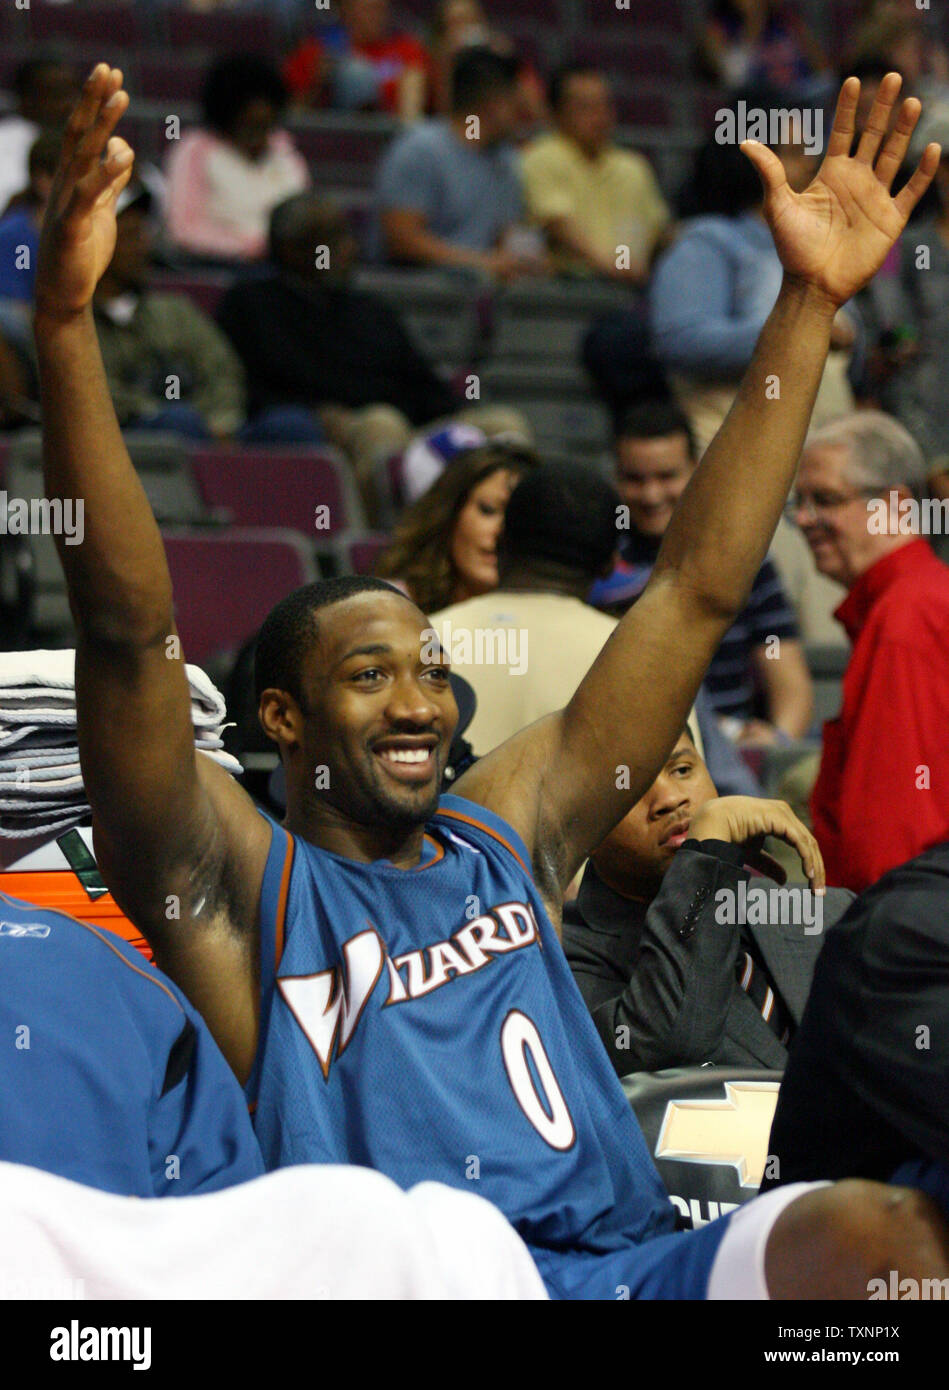 Gilbert Arenas On Why He Really Got Suspended By The Washington Wizards,  Etan's Suspension, More 